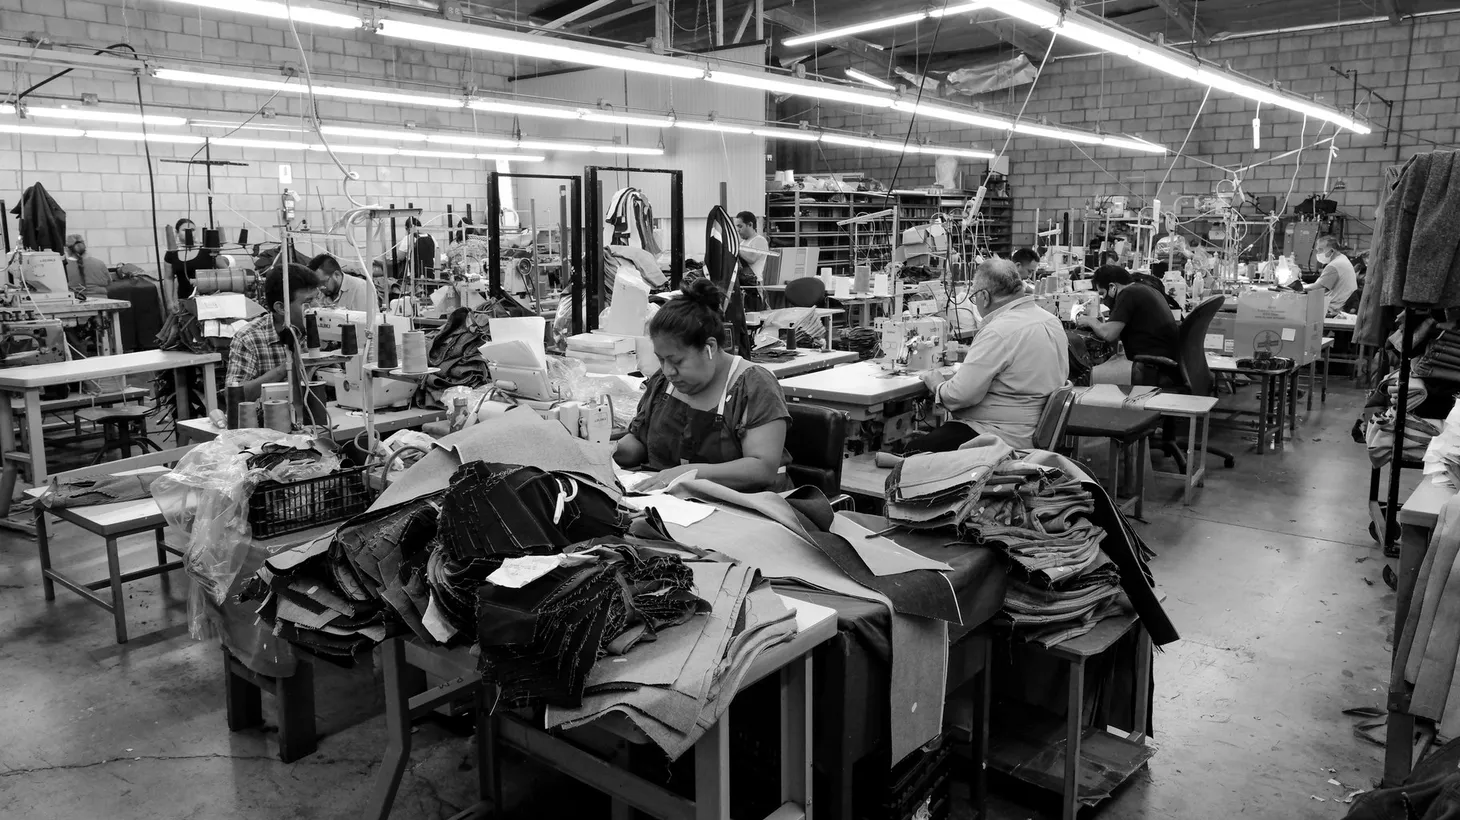 Under fluorescent light, men and women stay focused during the work day at 9B Apparel in Huntington Park, CA, August 26, 2022.